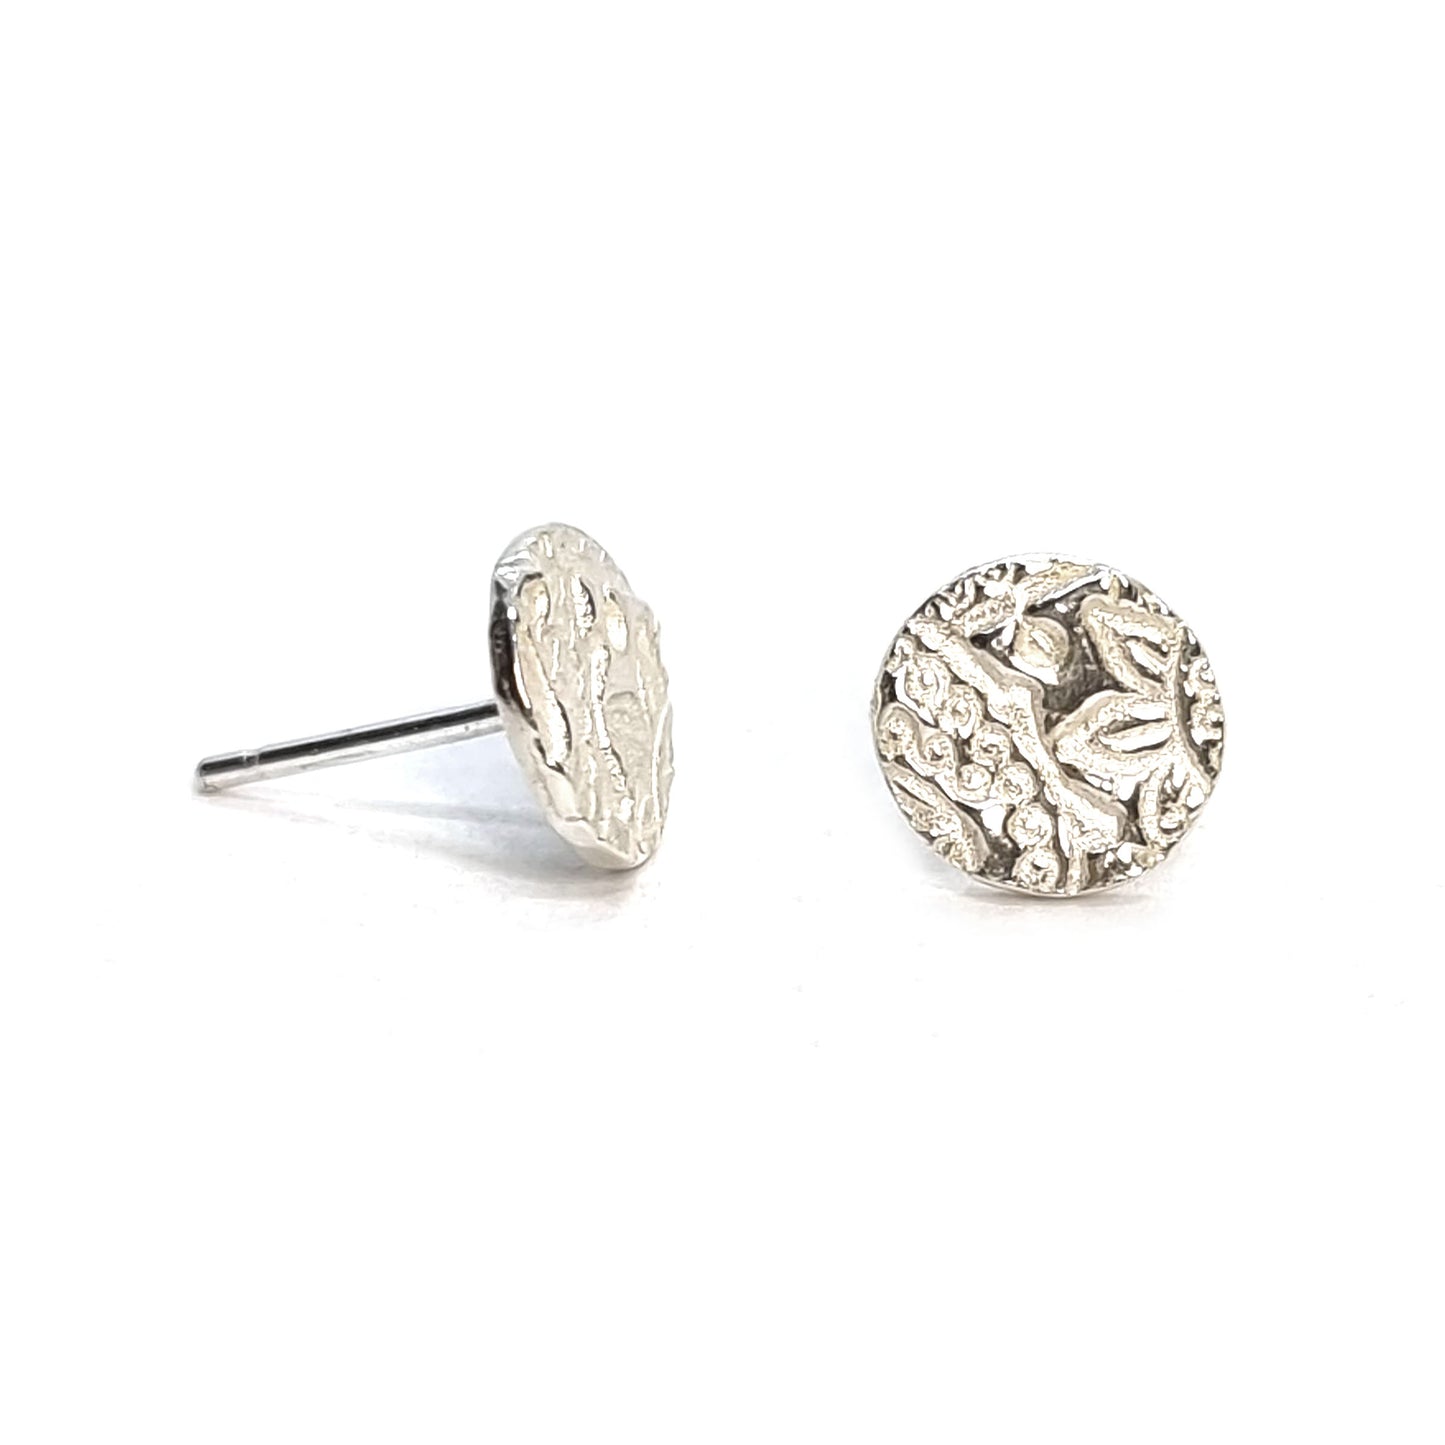 Round silver stud earrings with pattern